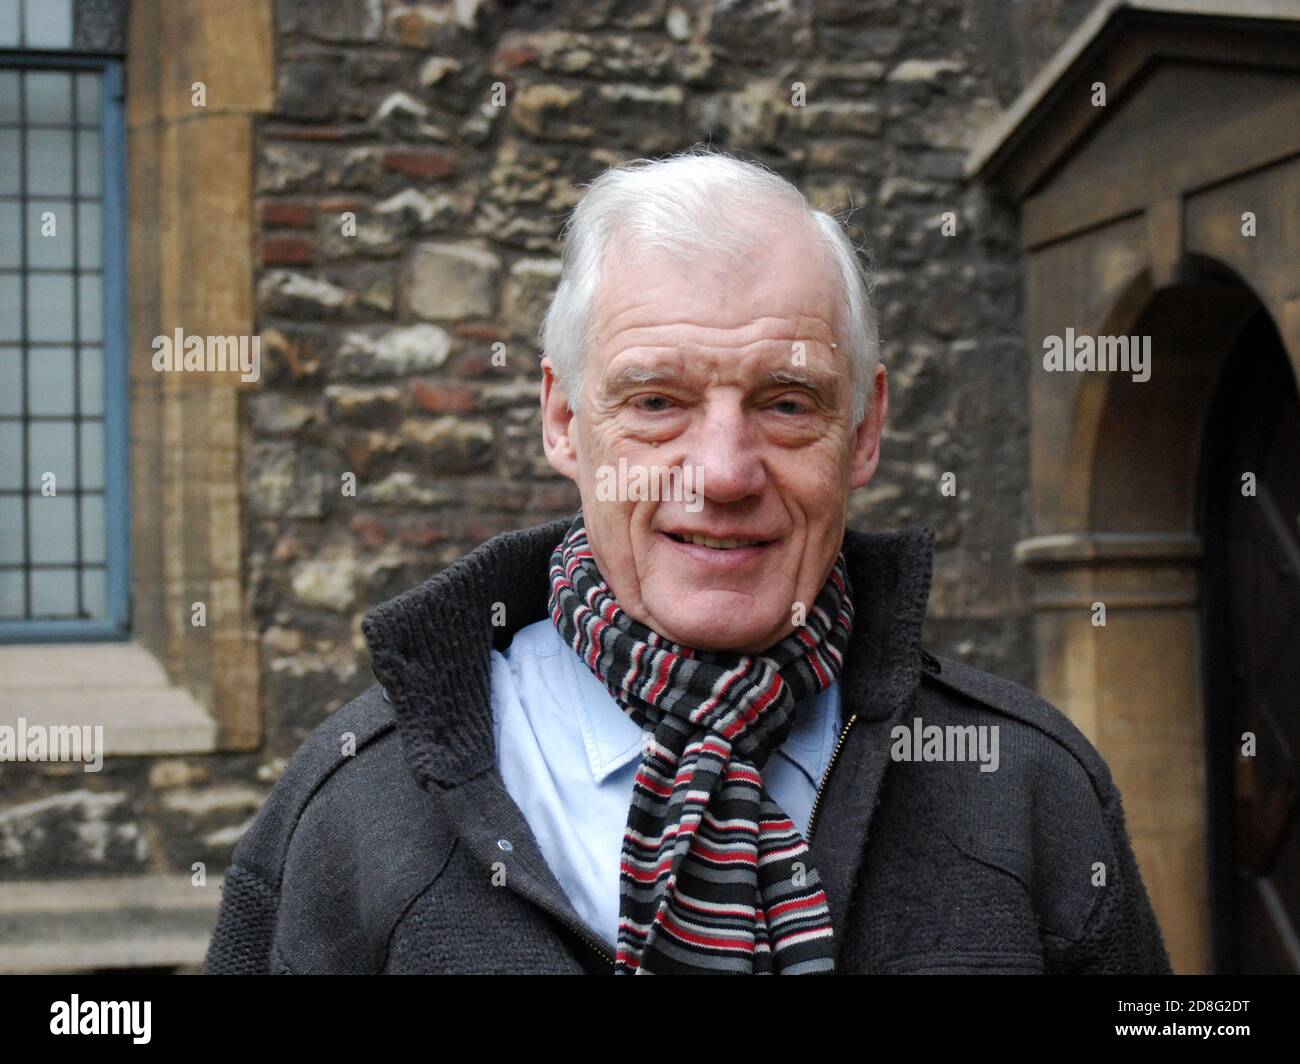 Richard Kimber Franklin, AKA Richard Franklin, English TV & Stage Actor, Director Writer & Political Activist, known for BBC cult TV Dr Who Doctor Who Stock Photo